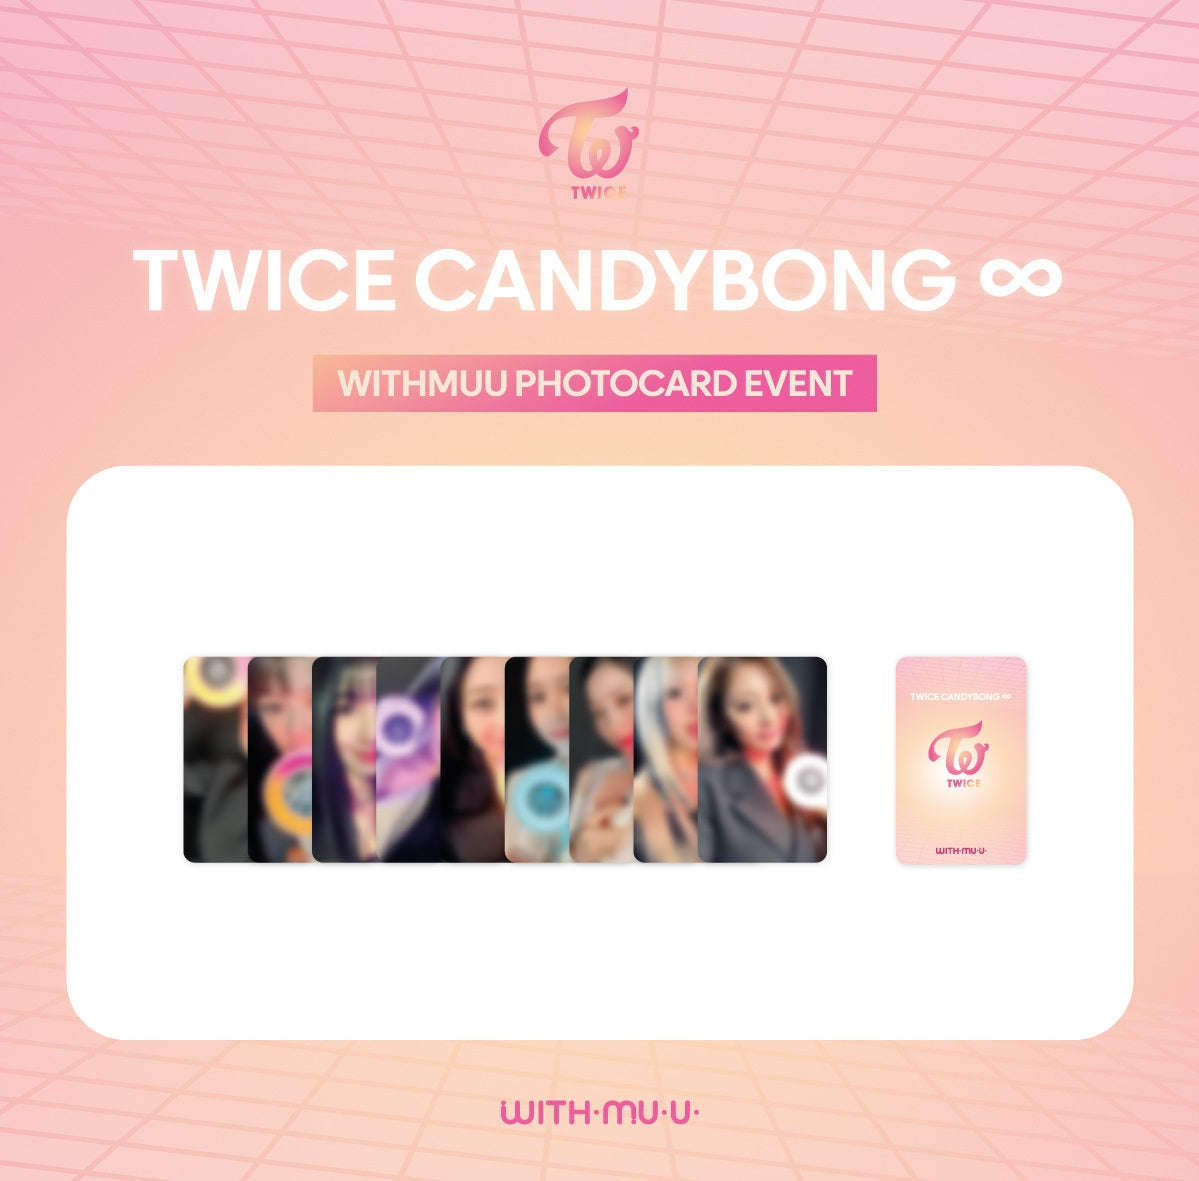 [PRE-ORDER] TWICE - OFFICIAL LIGHT STICK VER.3 CANDYBONG ∞ WITHMUU SPECIAL GIFT - 1 Selfie photocard set (9ea) once 트와이스 캔디봉 응원봉